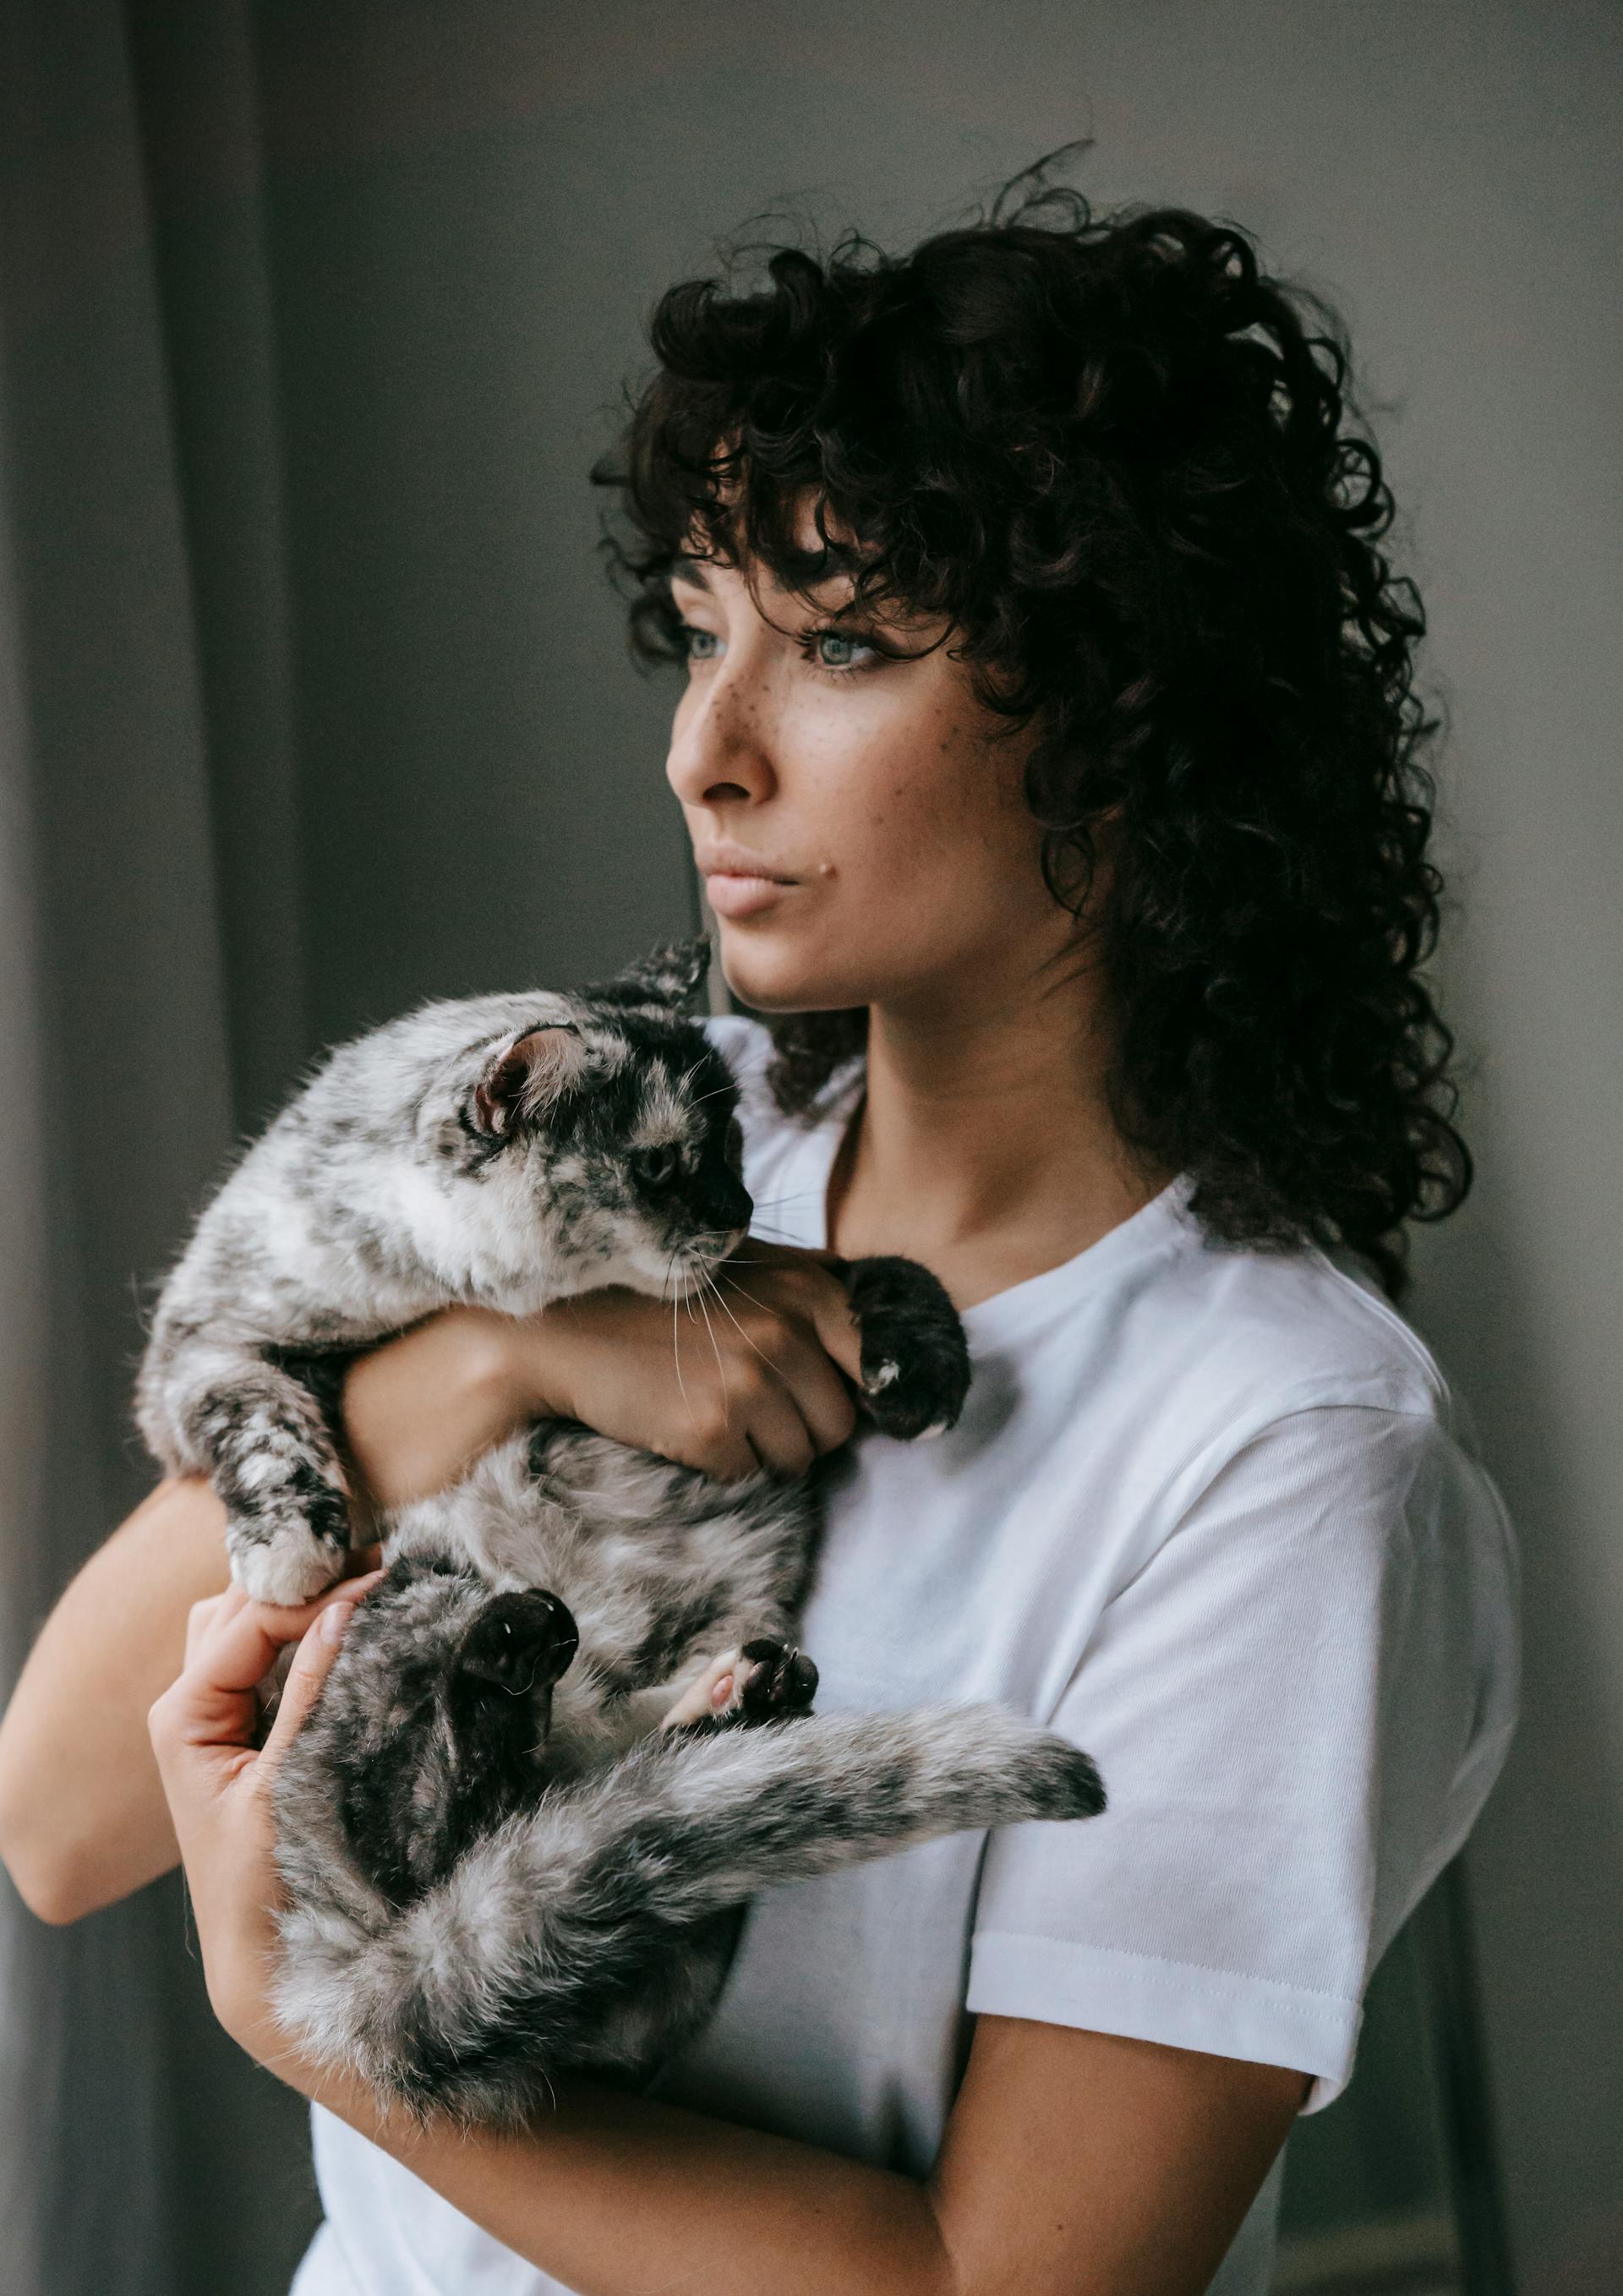 A woman with an adorable pet cat | Source: Pexels